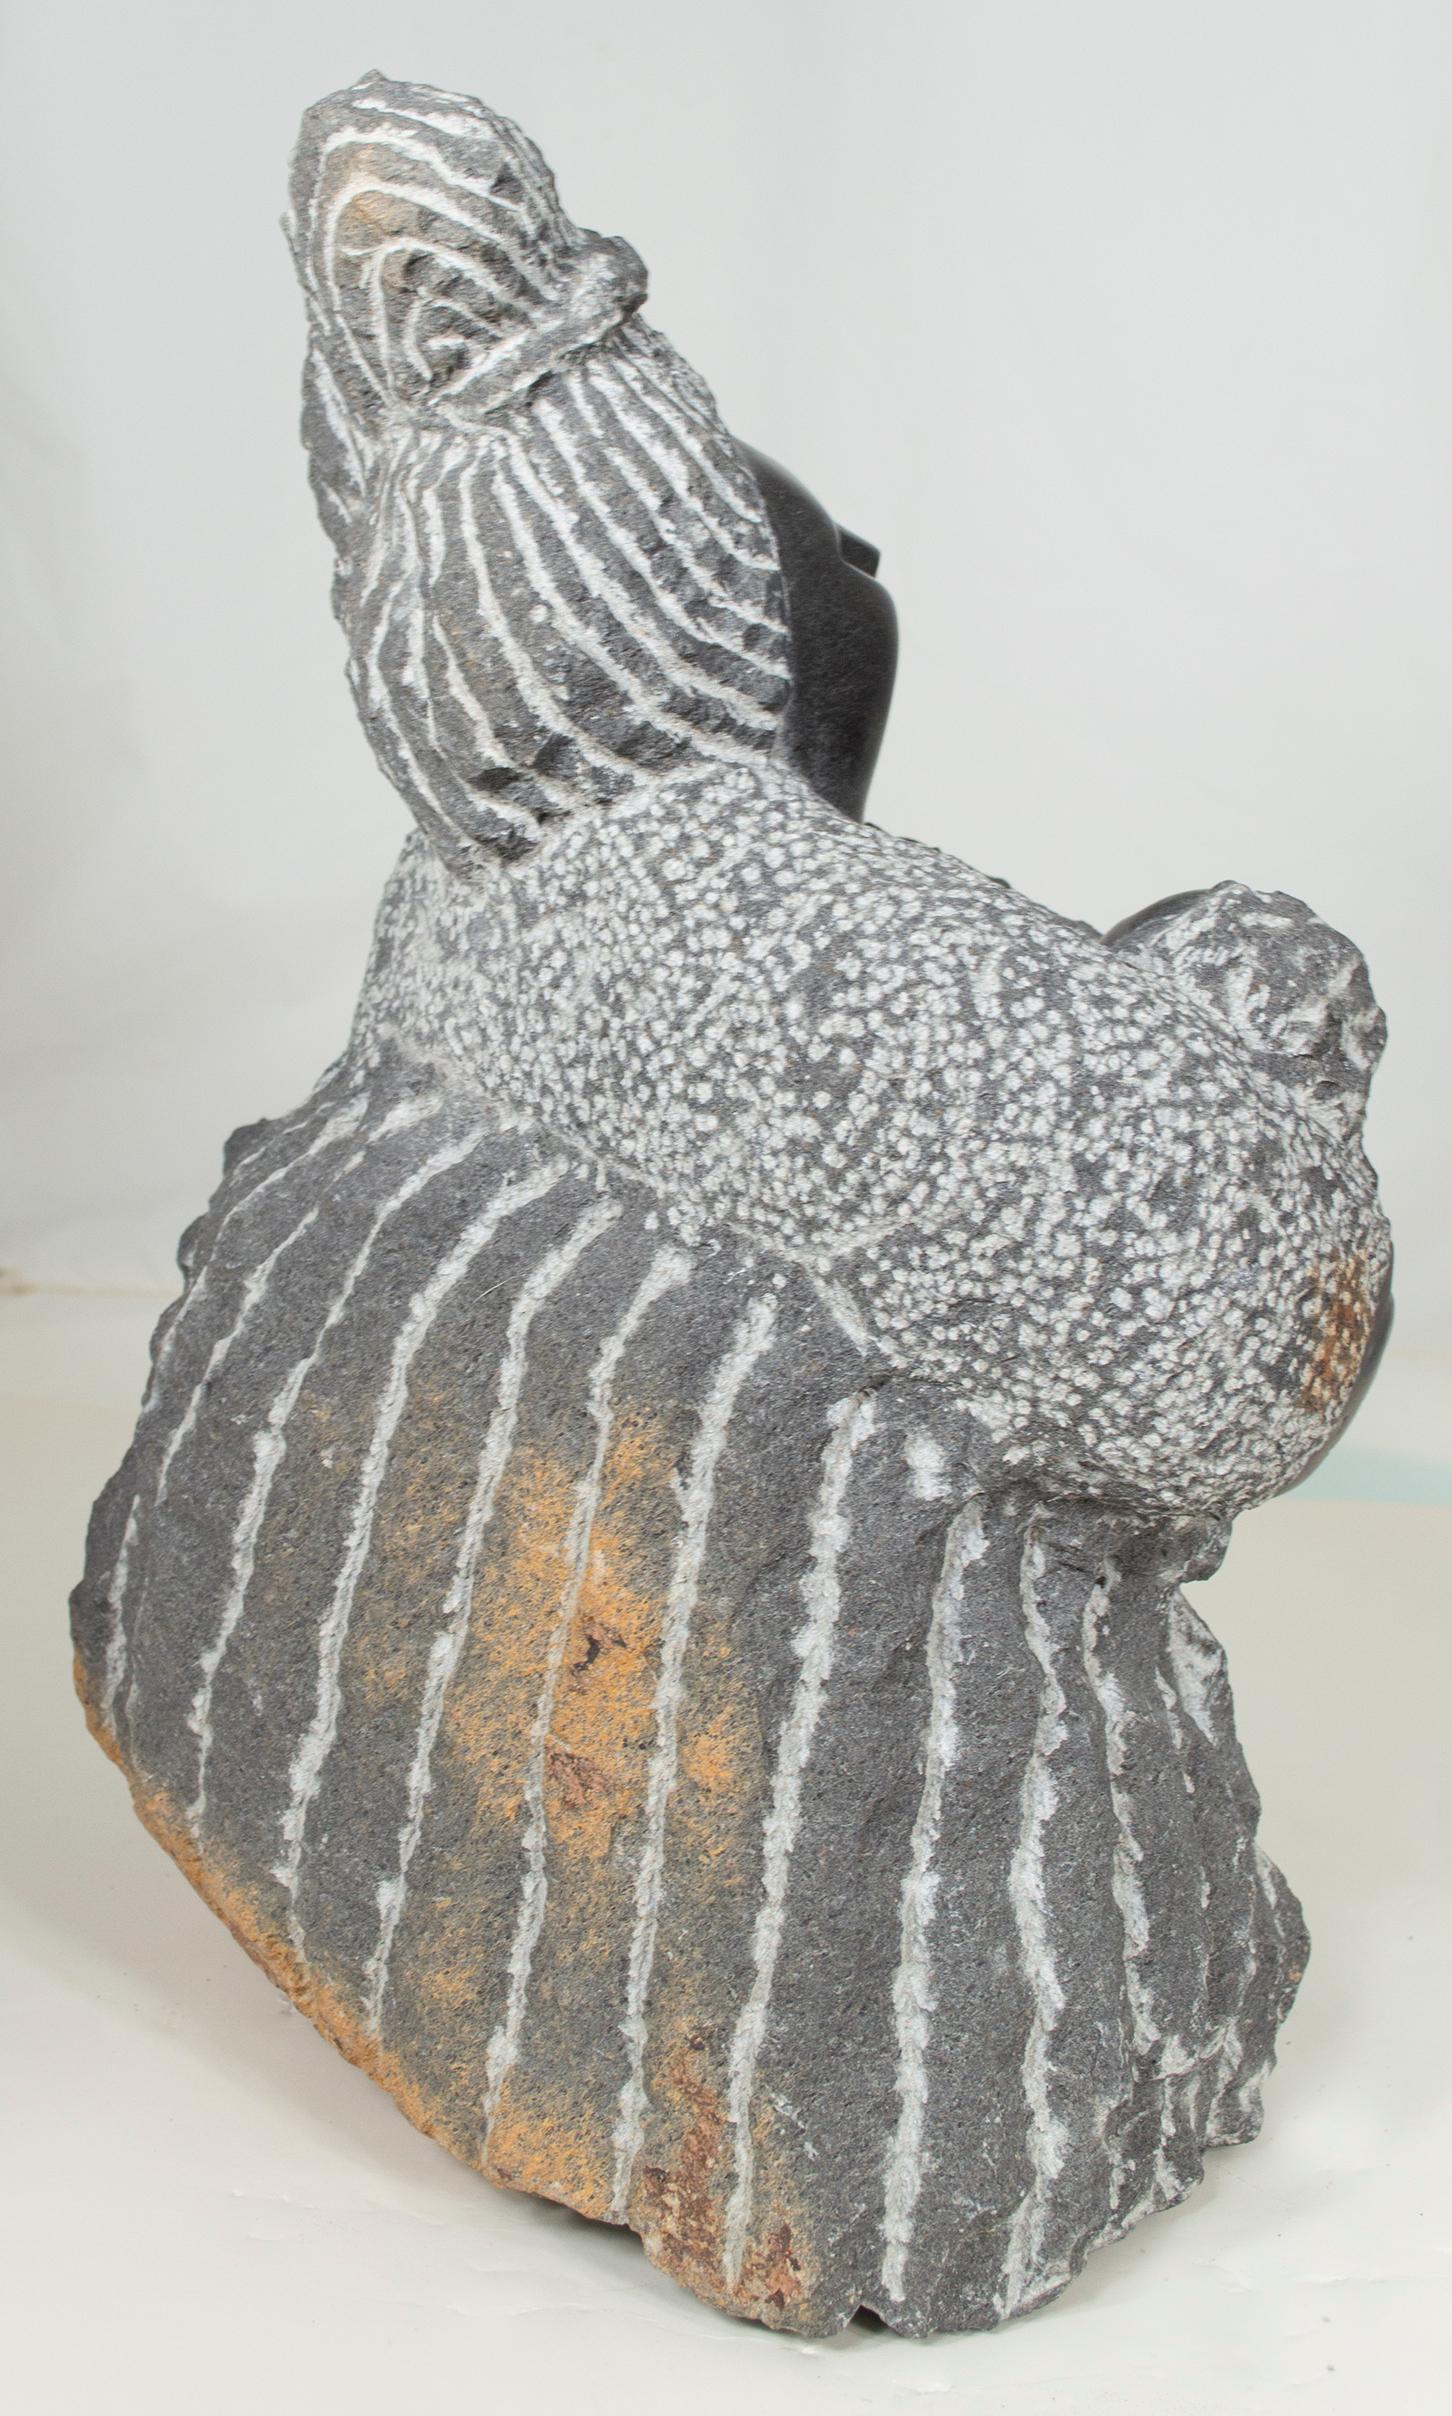 'Coming From Labor' is an original black serpentine sculpture by the celebrated second generation Shona artist Colleen Madamombe. The sculpture presents a character common to Madamombe's work: a woman with a round face and wearing a billowing,